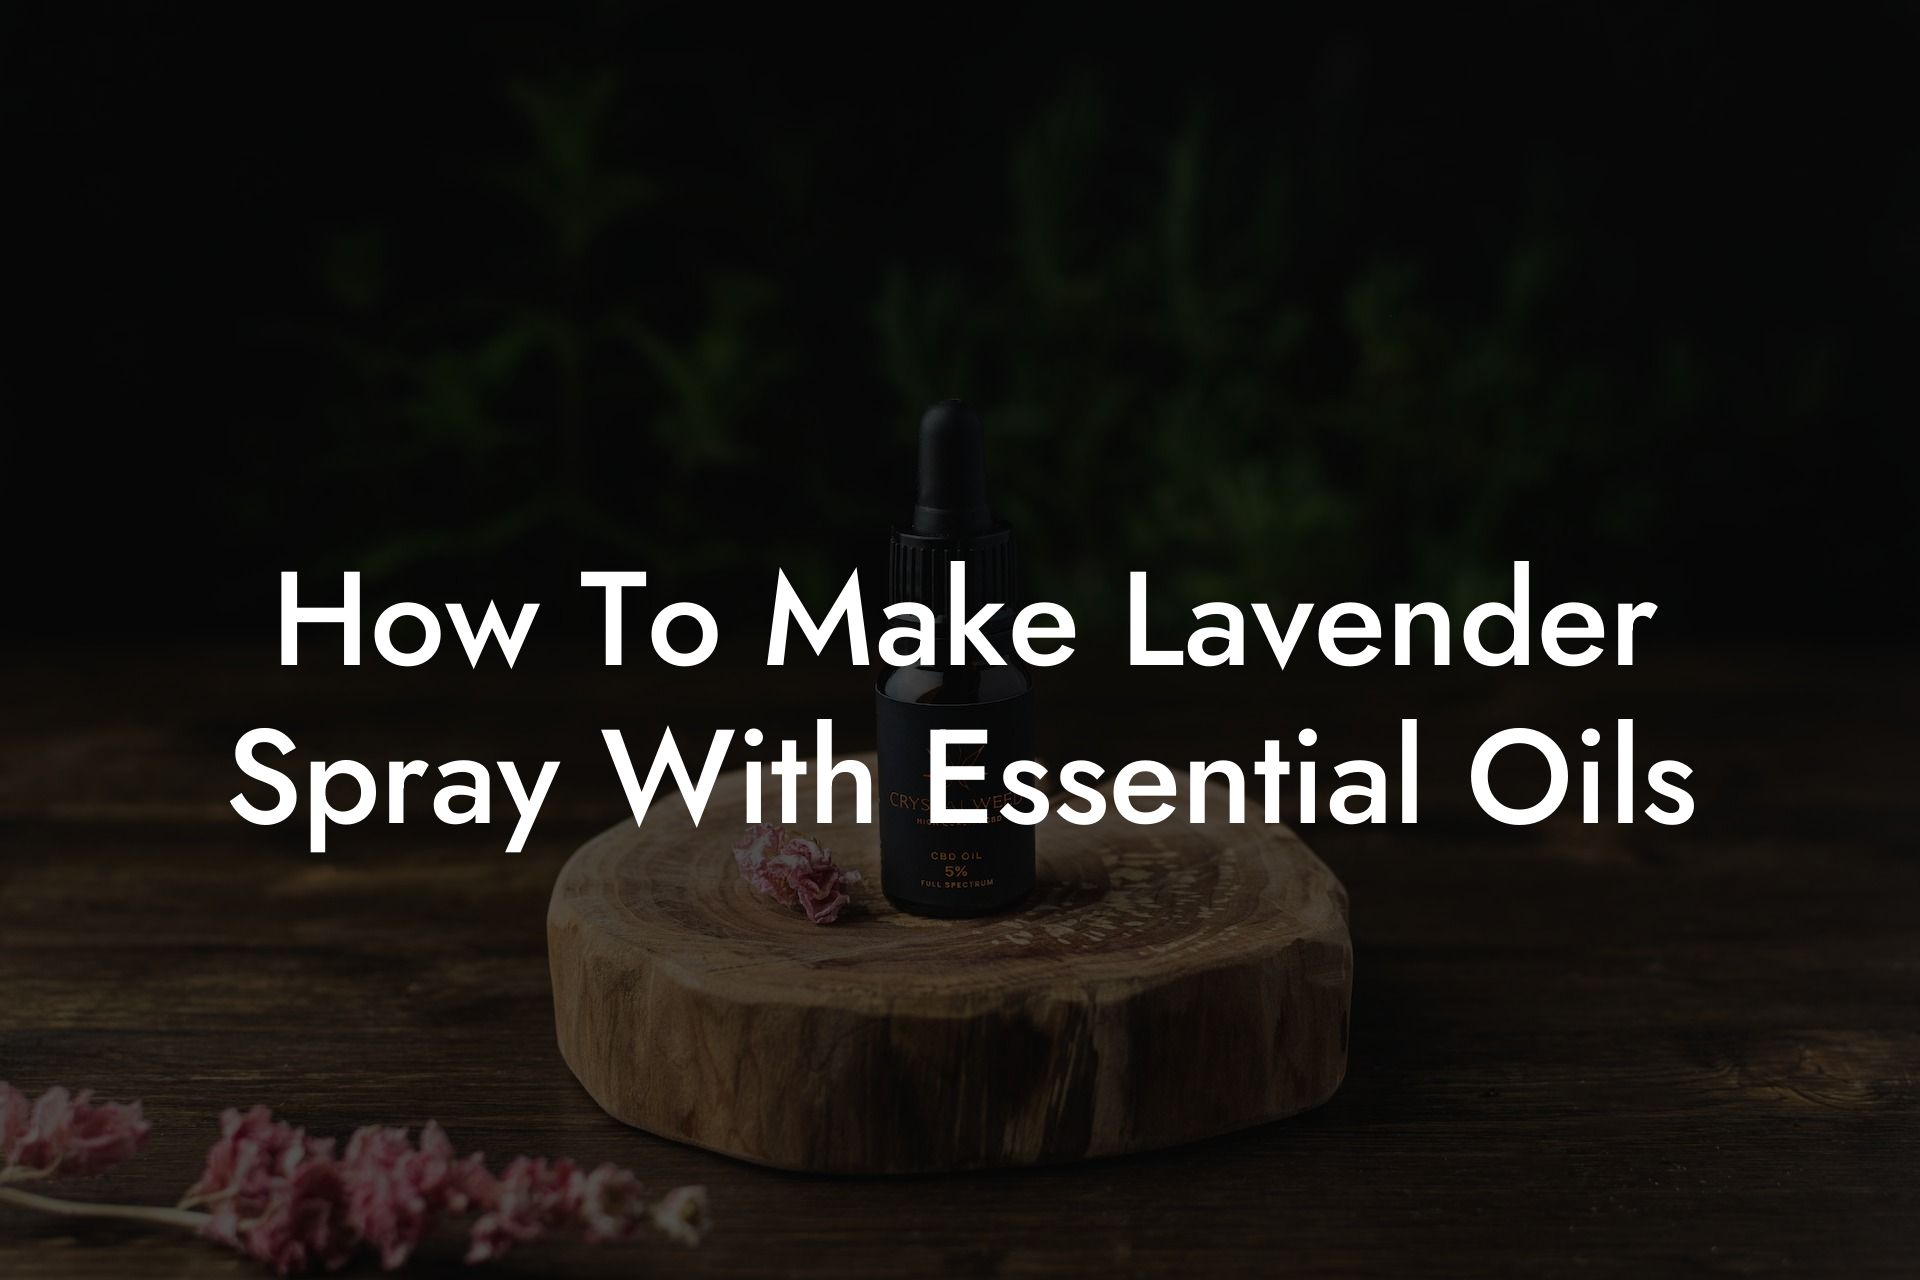 How To Make Lavender Spray With Essential Oils